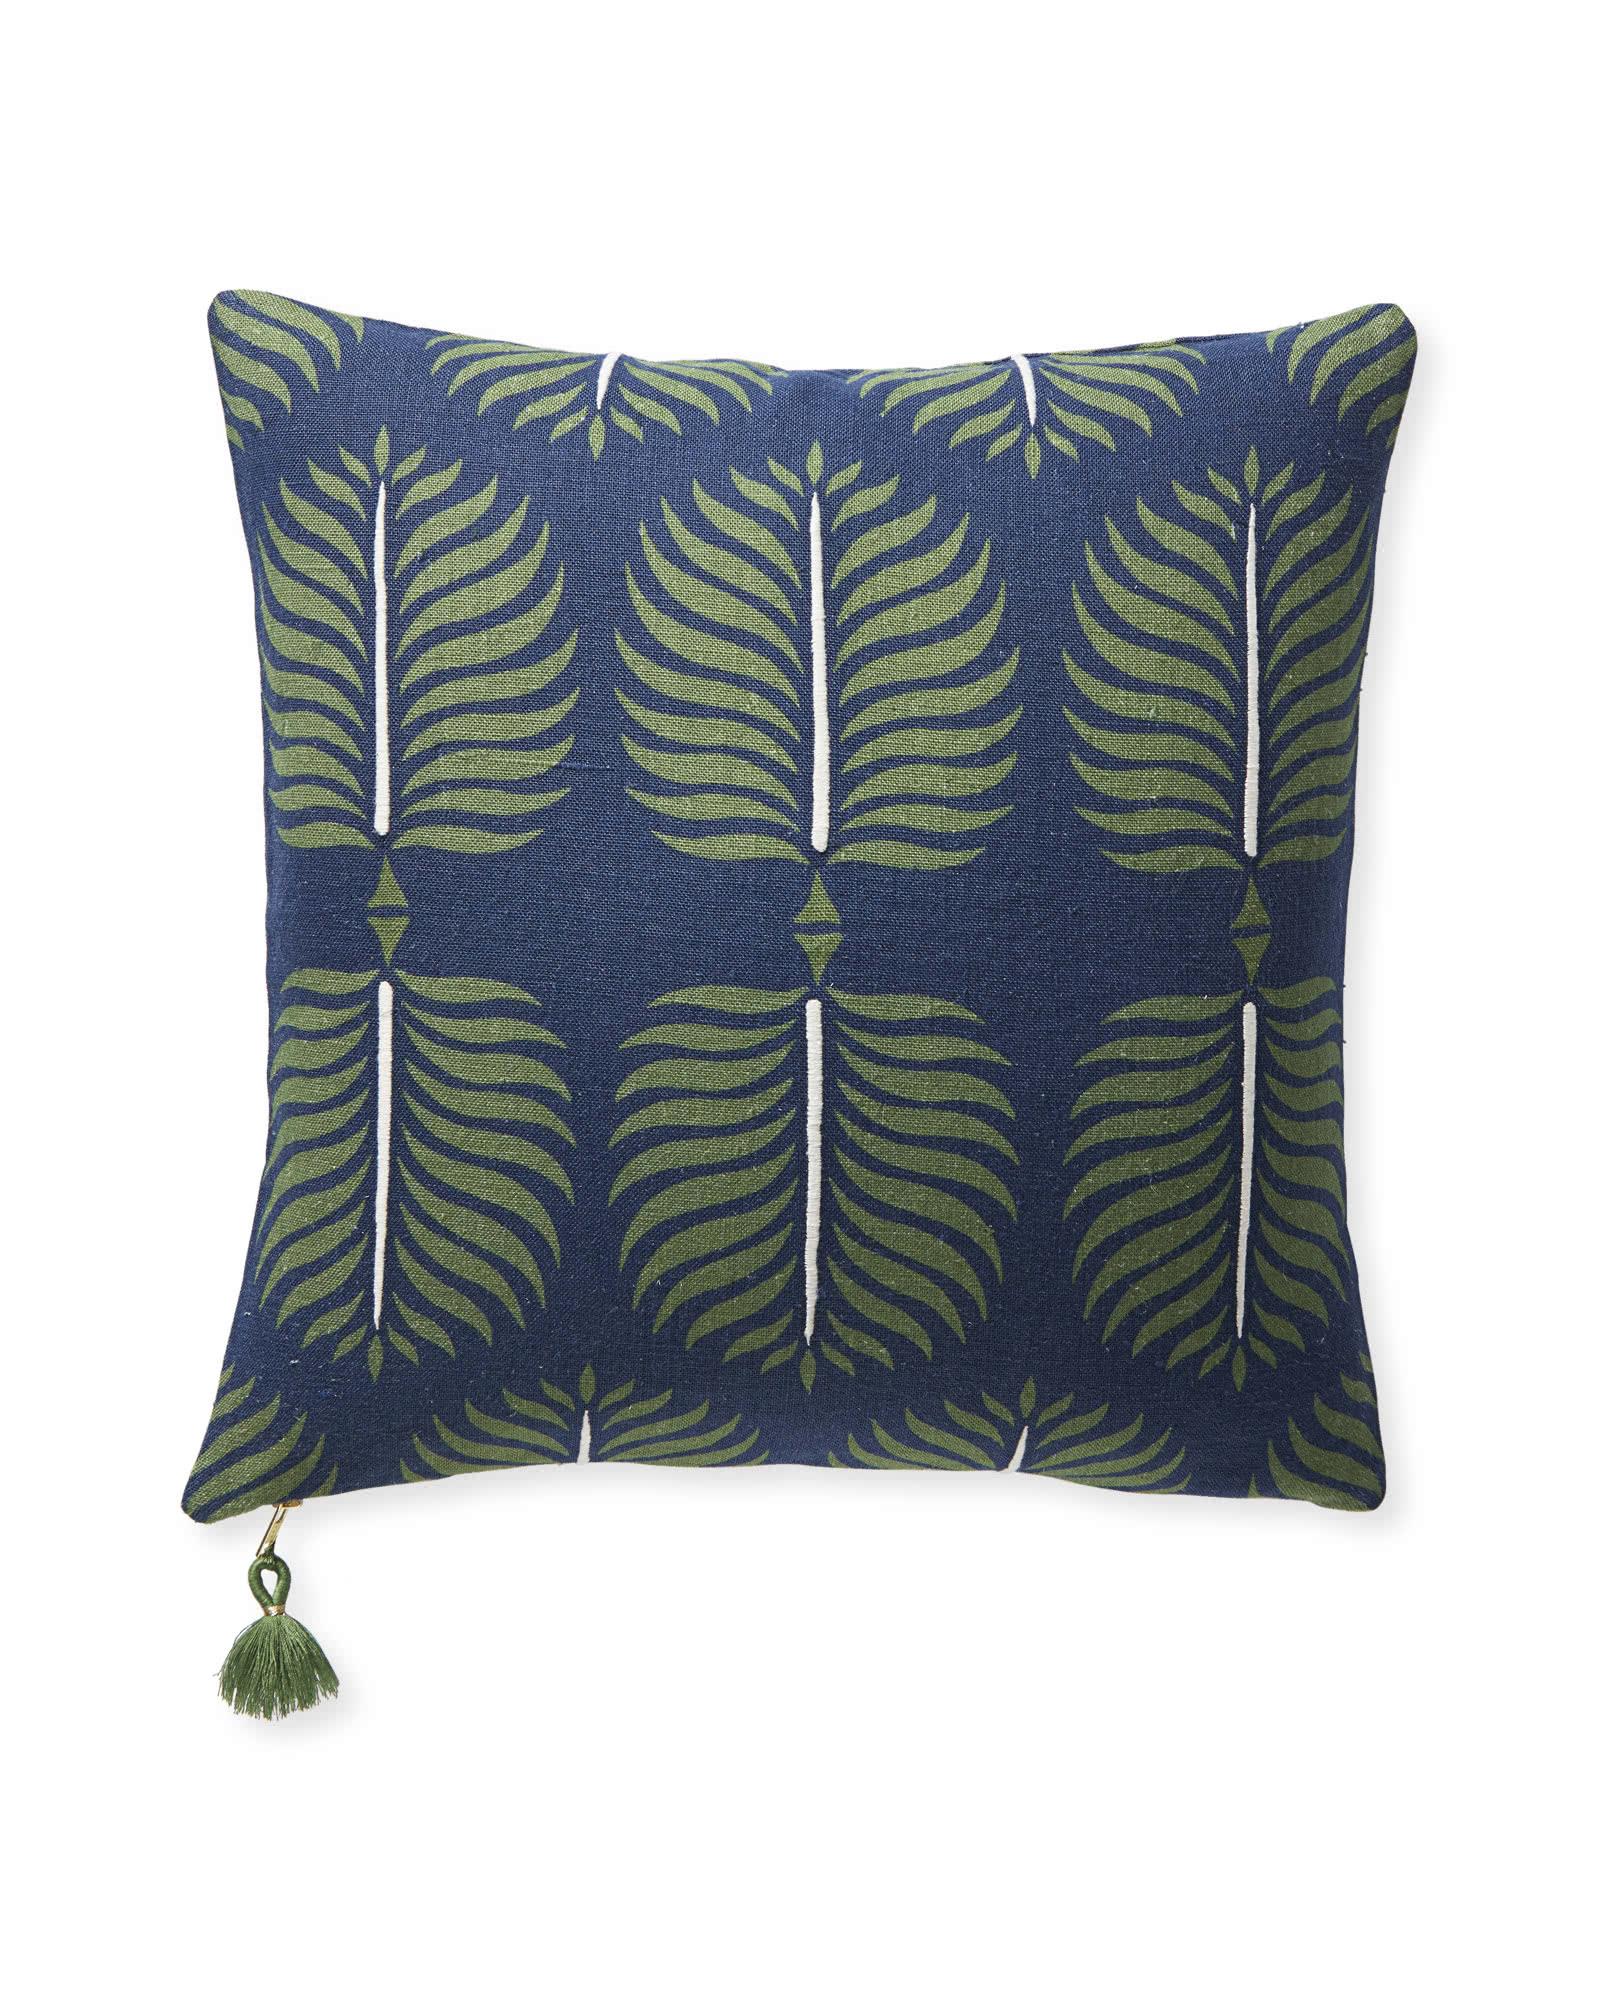 Outdoor Pillow Inserts, 12 x 18 | Serena & Lily